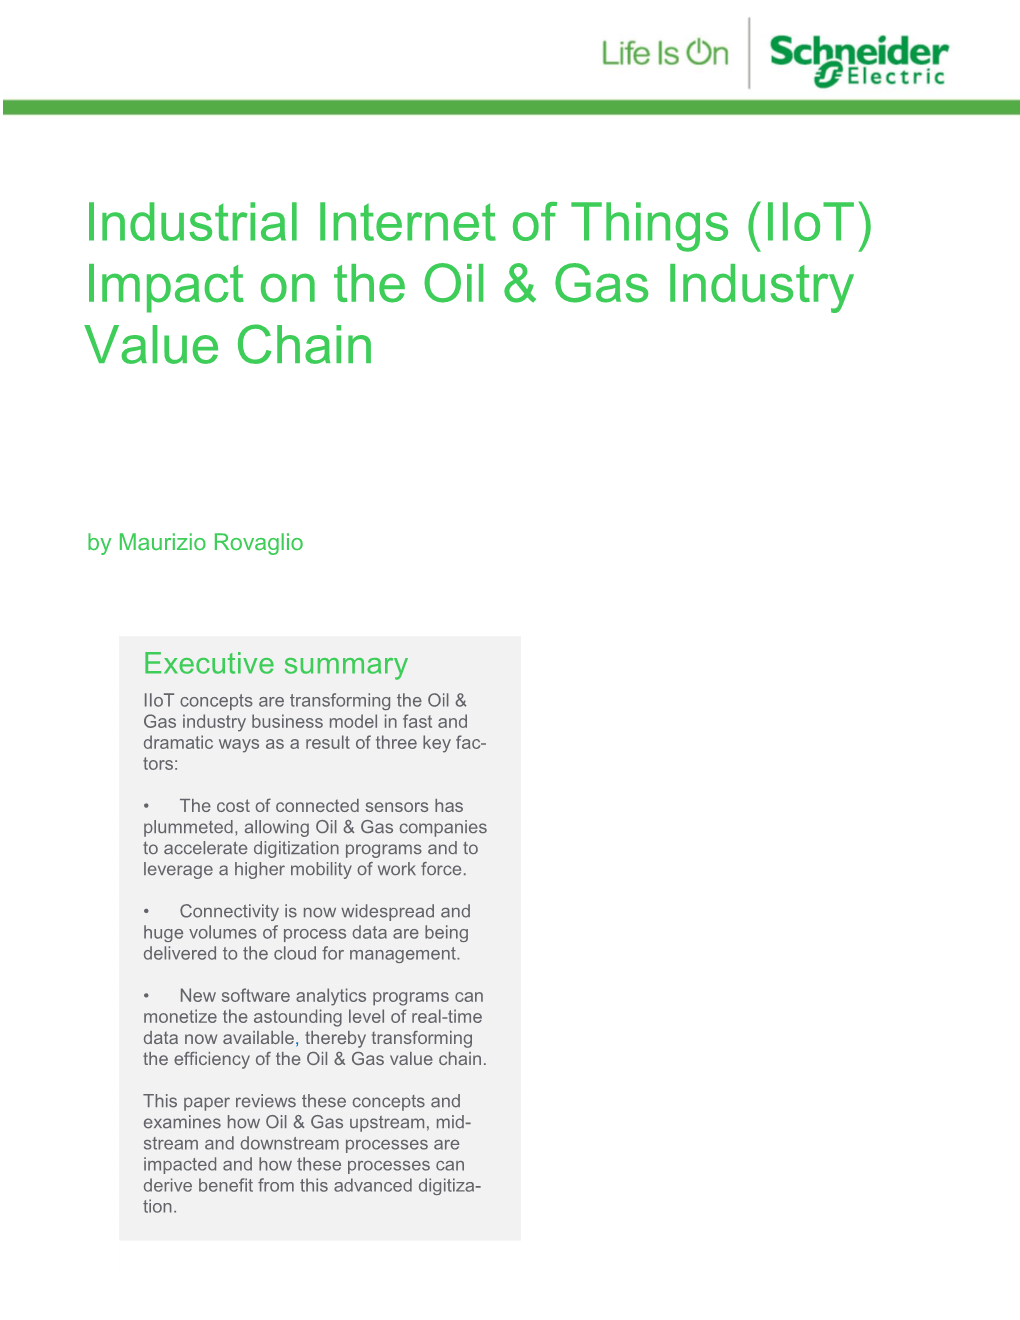 (Iiot) Impact on the Oil & Gas Industry Value Chain